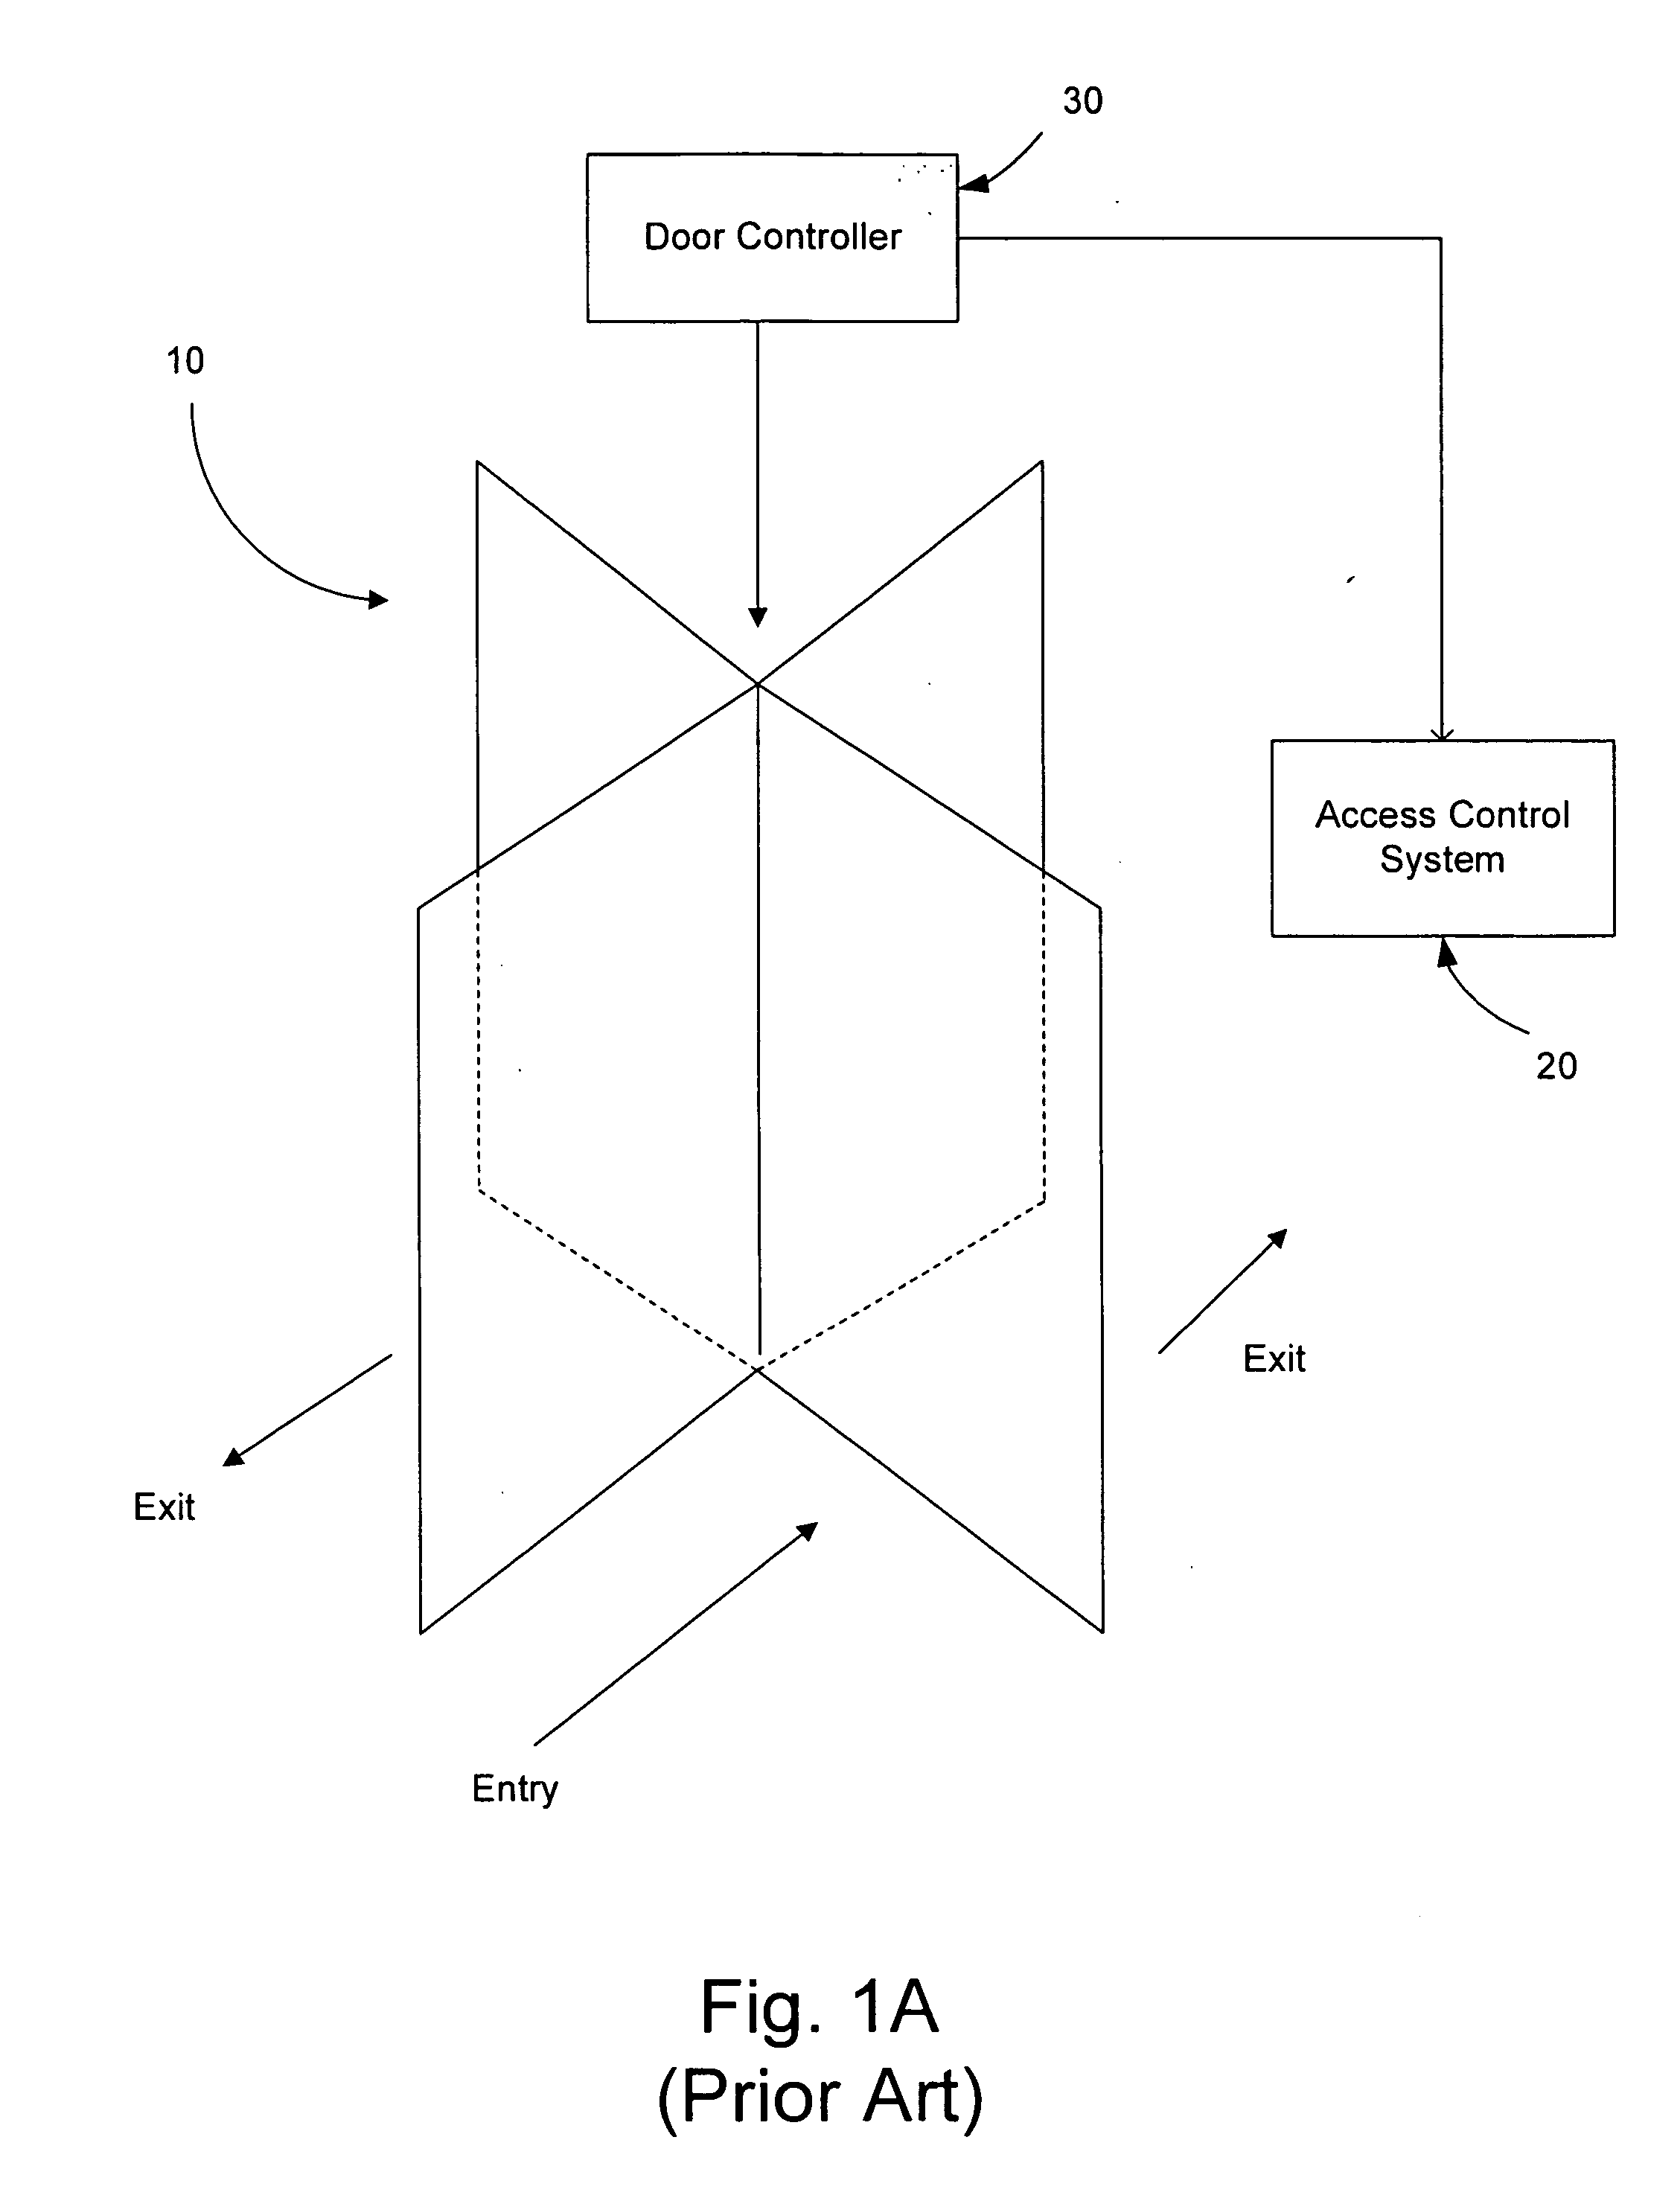 Method and apparatus for detecting non-people objects in revolving doors